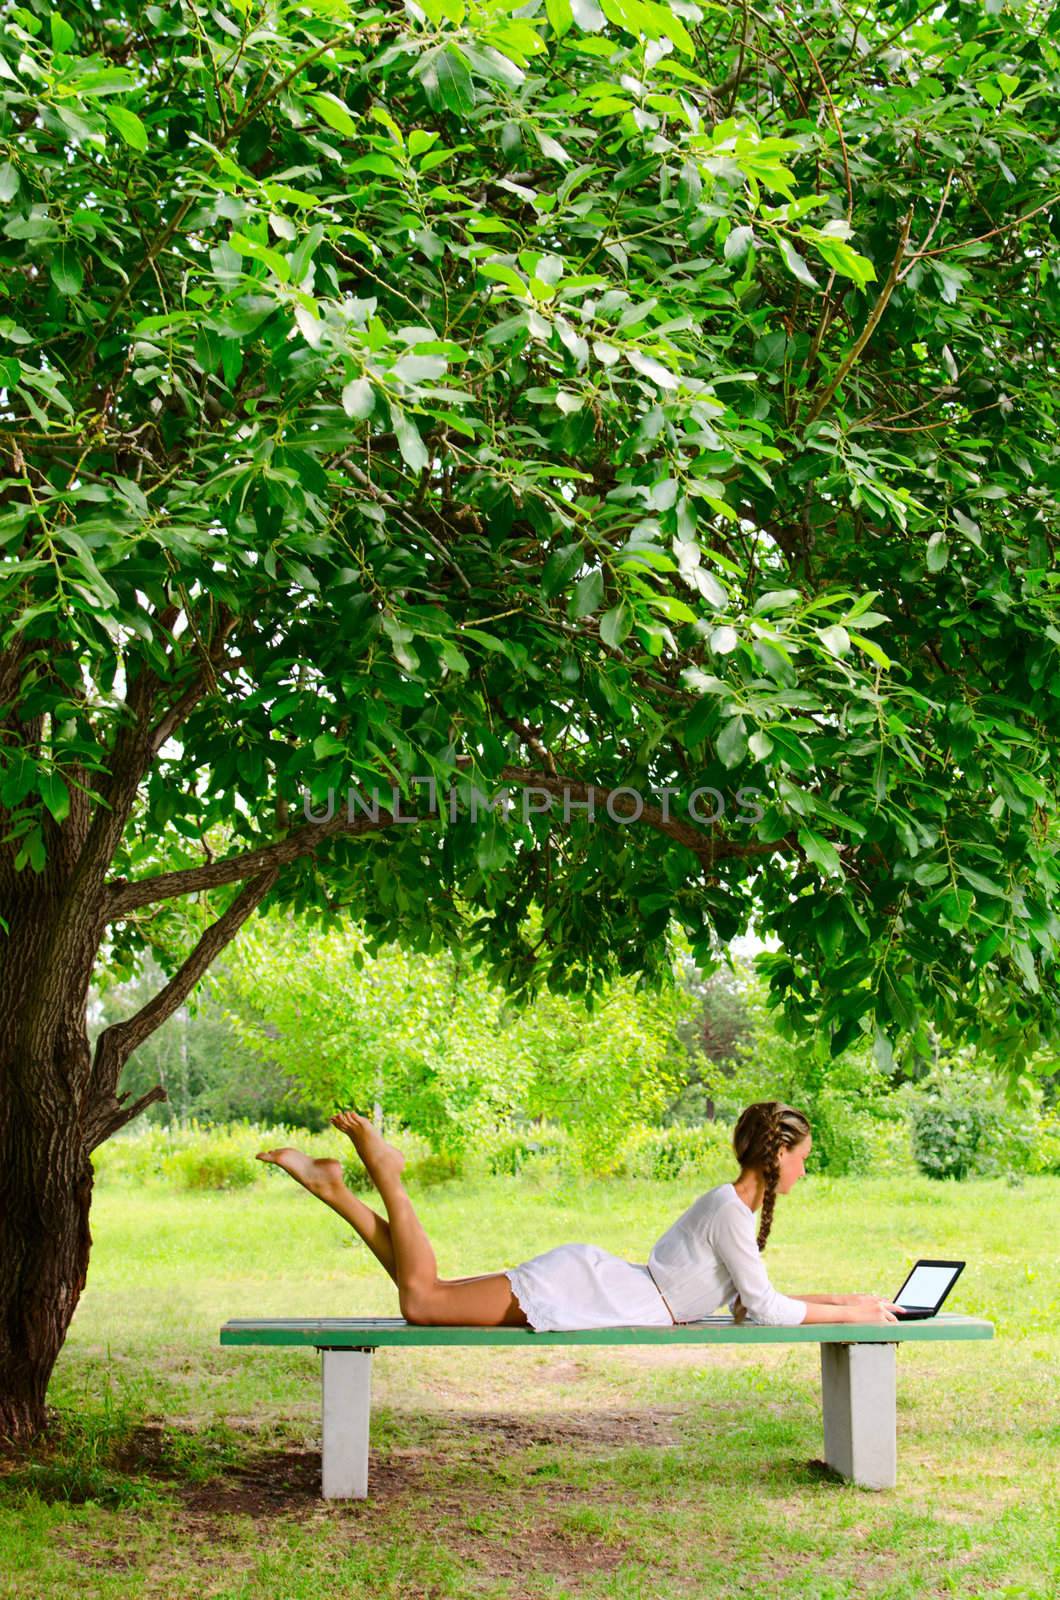 Pretty barefooted woman is laying on a bench under the green tree. She is working with small notebook